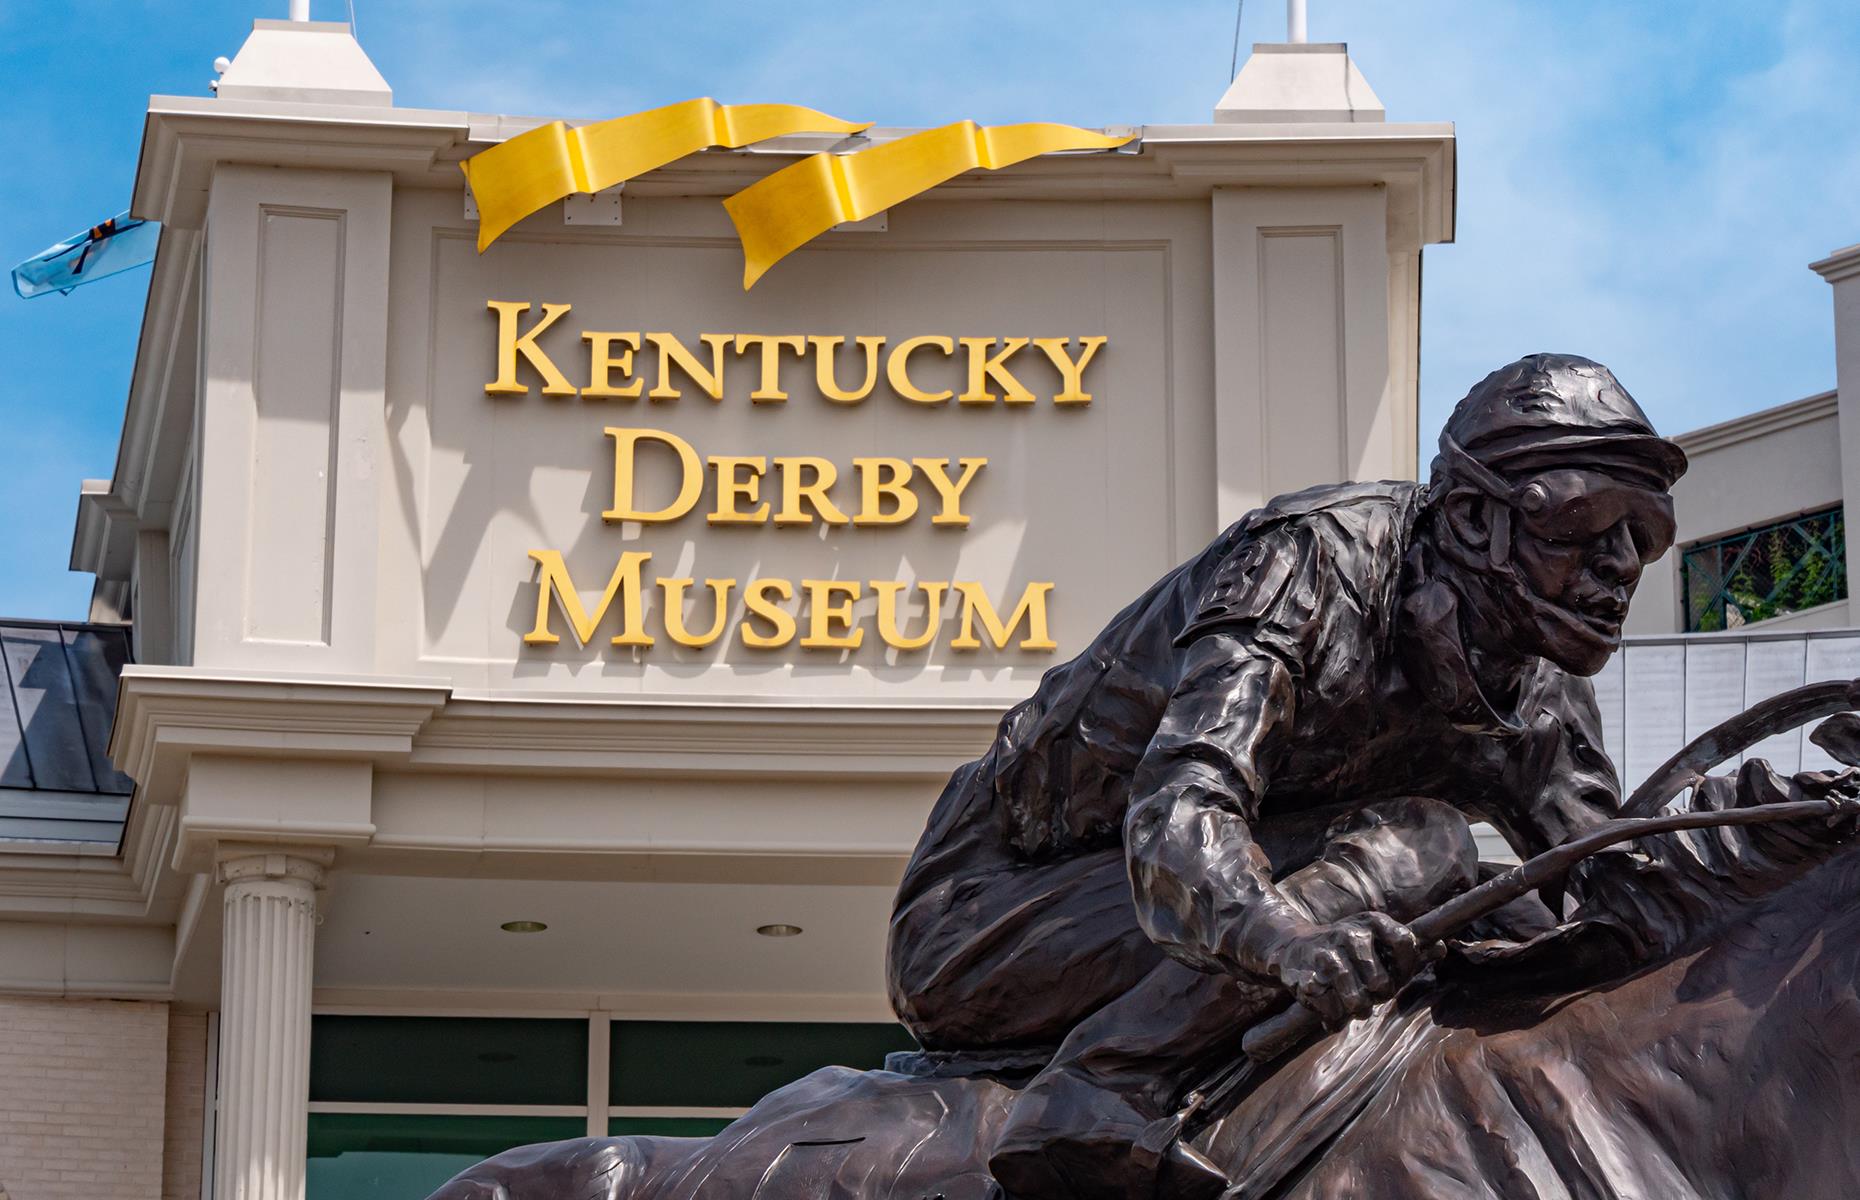 <p>Among Kentucky's most famous exports, the Kentucky Derby is one of the most historic horse races in the world and its story is well-documented at the Kentucky Derby Museum. You can now browse through <a href="https://www.derbymuseum.org/virtualkdm.html">the museum's collection online</a>, alongside videos and expert commentary – a true delight for horse racing fans around the world. </p>